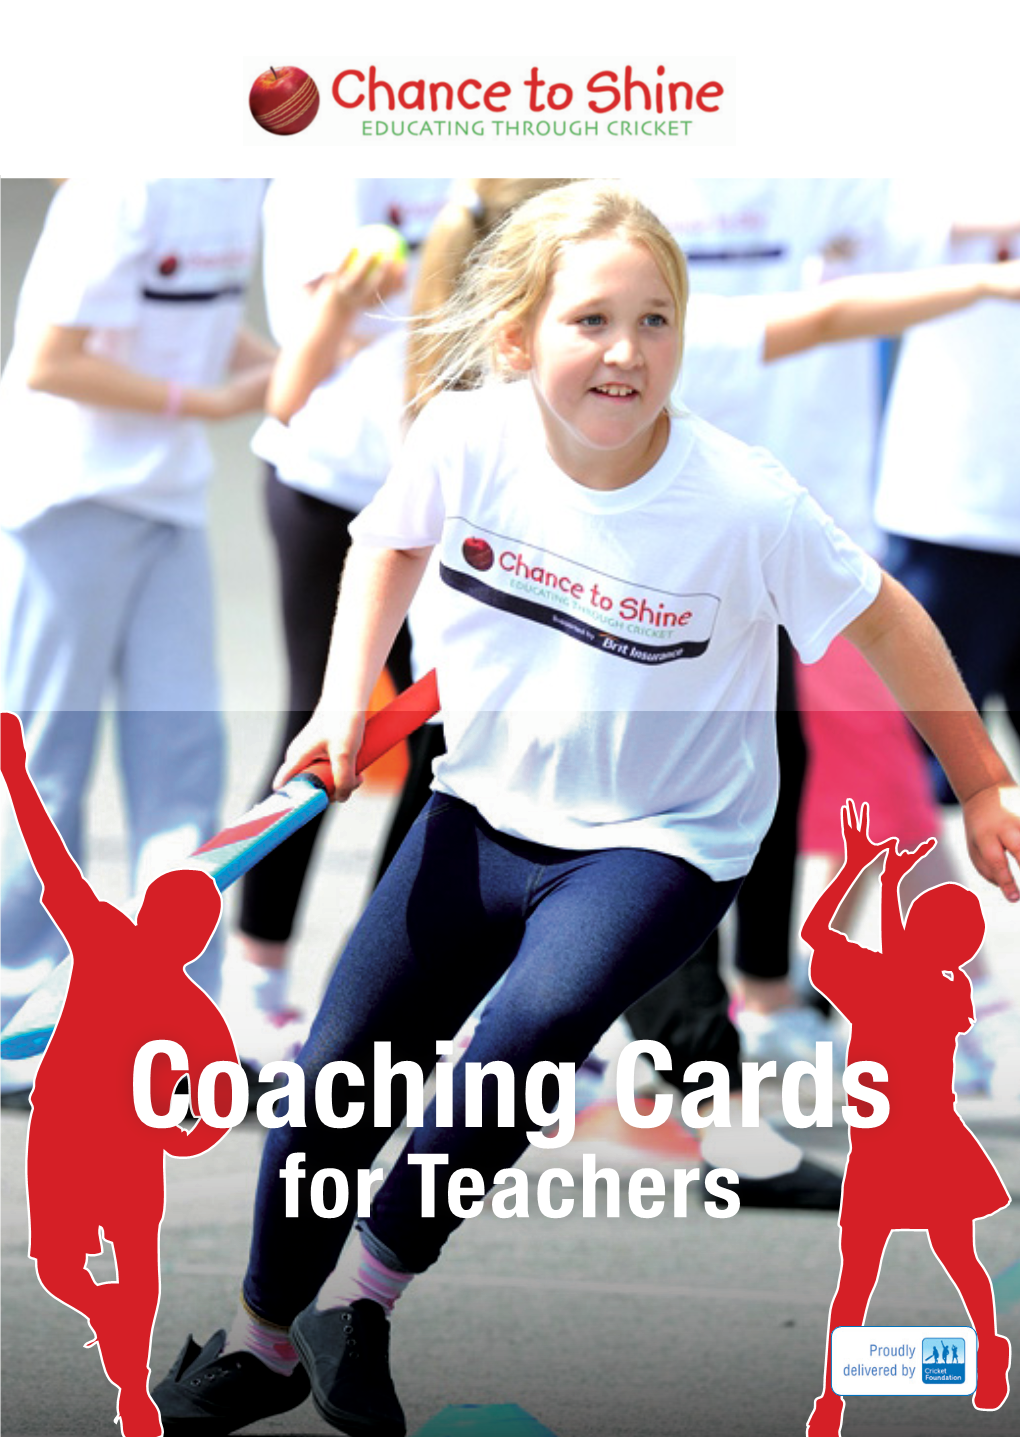 Coaching Cards for Teachers You Are Part of Something Special! You Are Part of a National Campaign